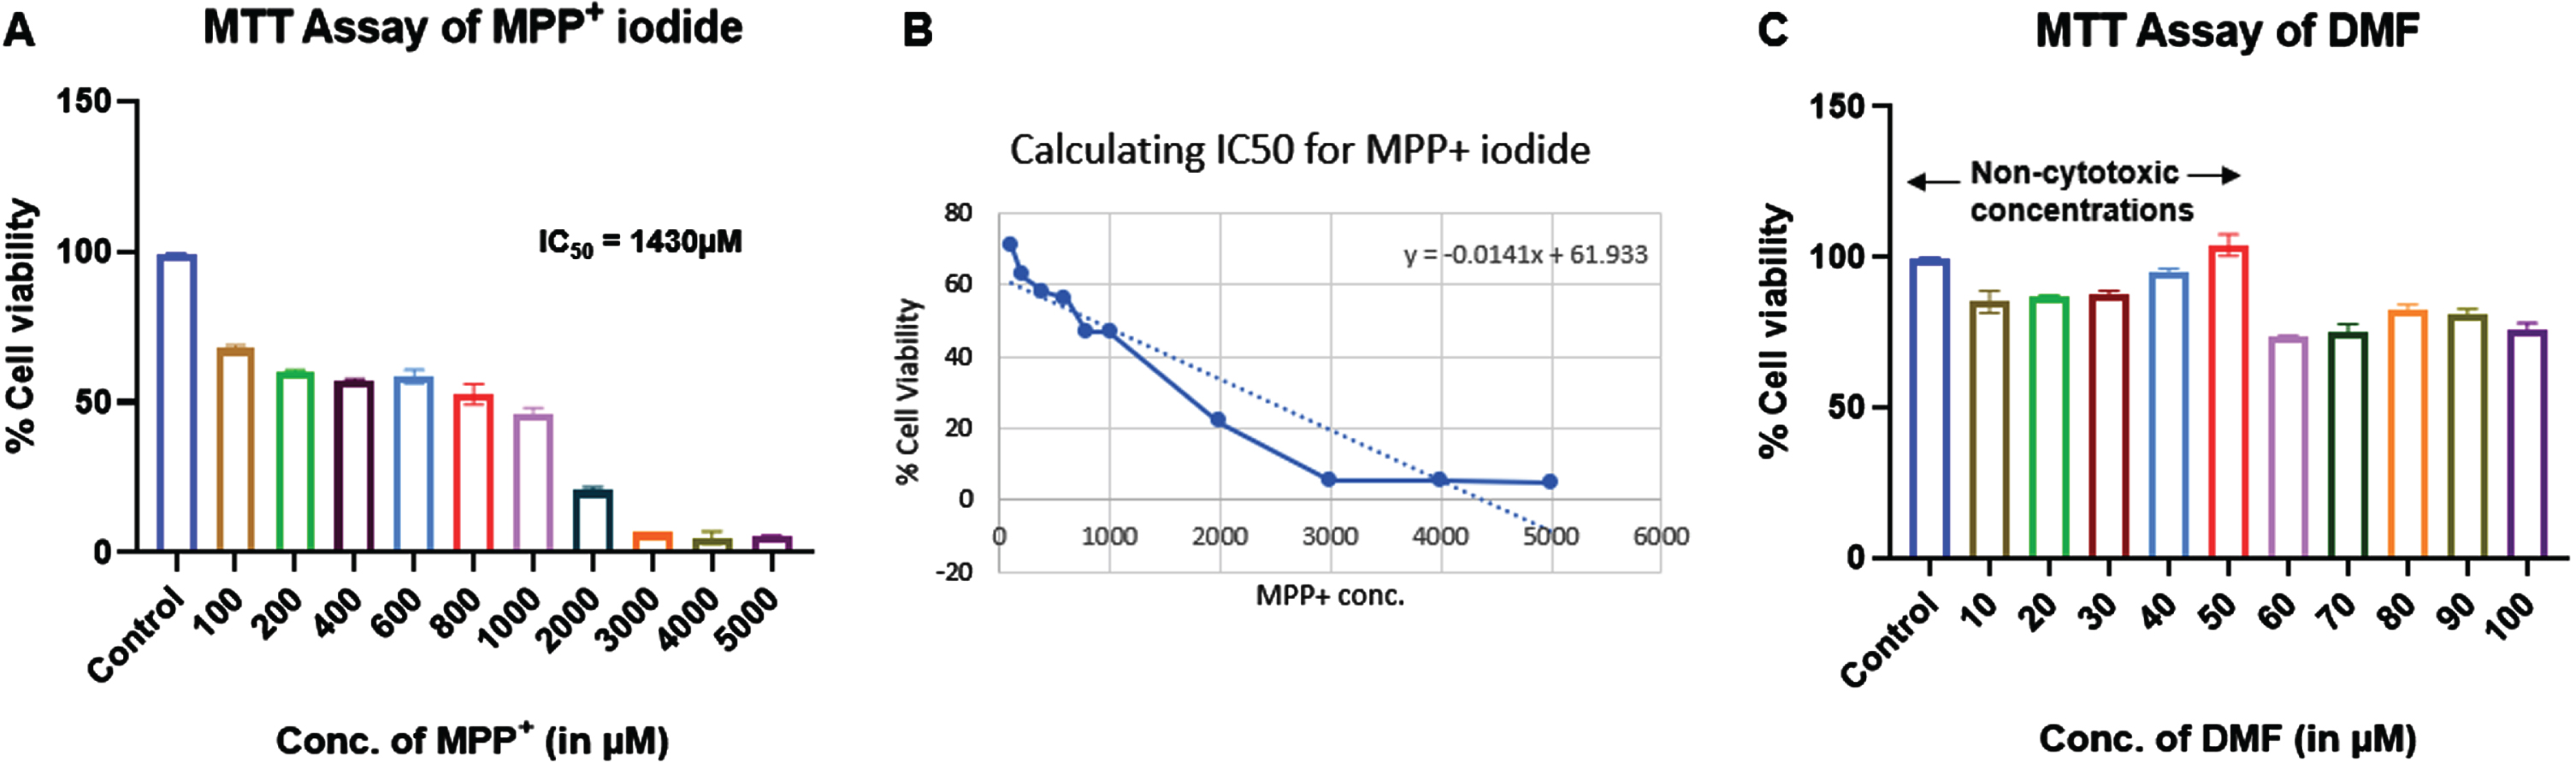 Effect of MPP+ iodide and DMF on cell viability of SHSY5Y cell line (n = 3). A) MTT assay of MPP+ iodide, B) IC50 of MPP+ iodide, C) MTT assay of DMF.